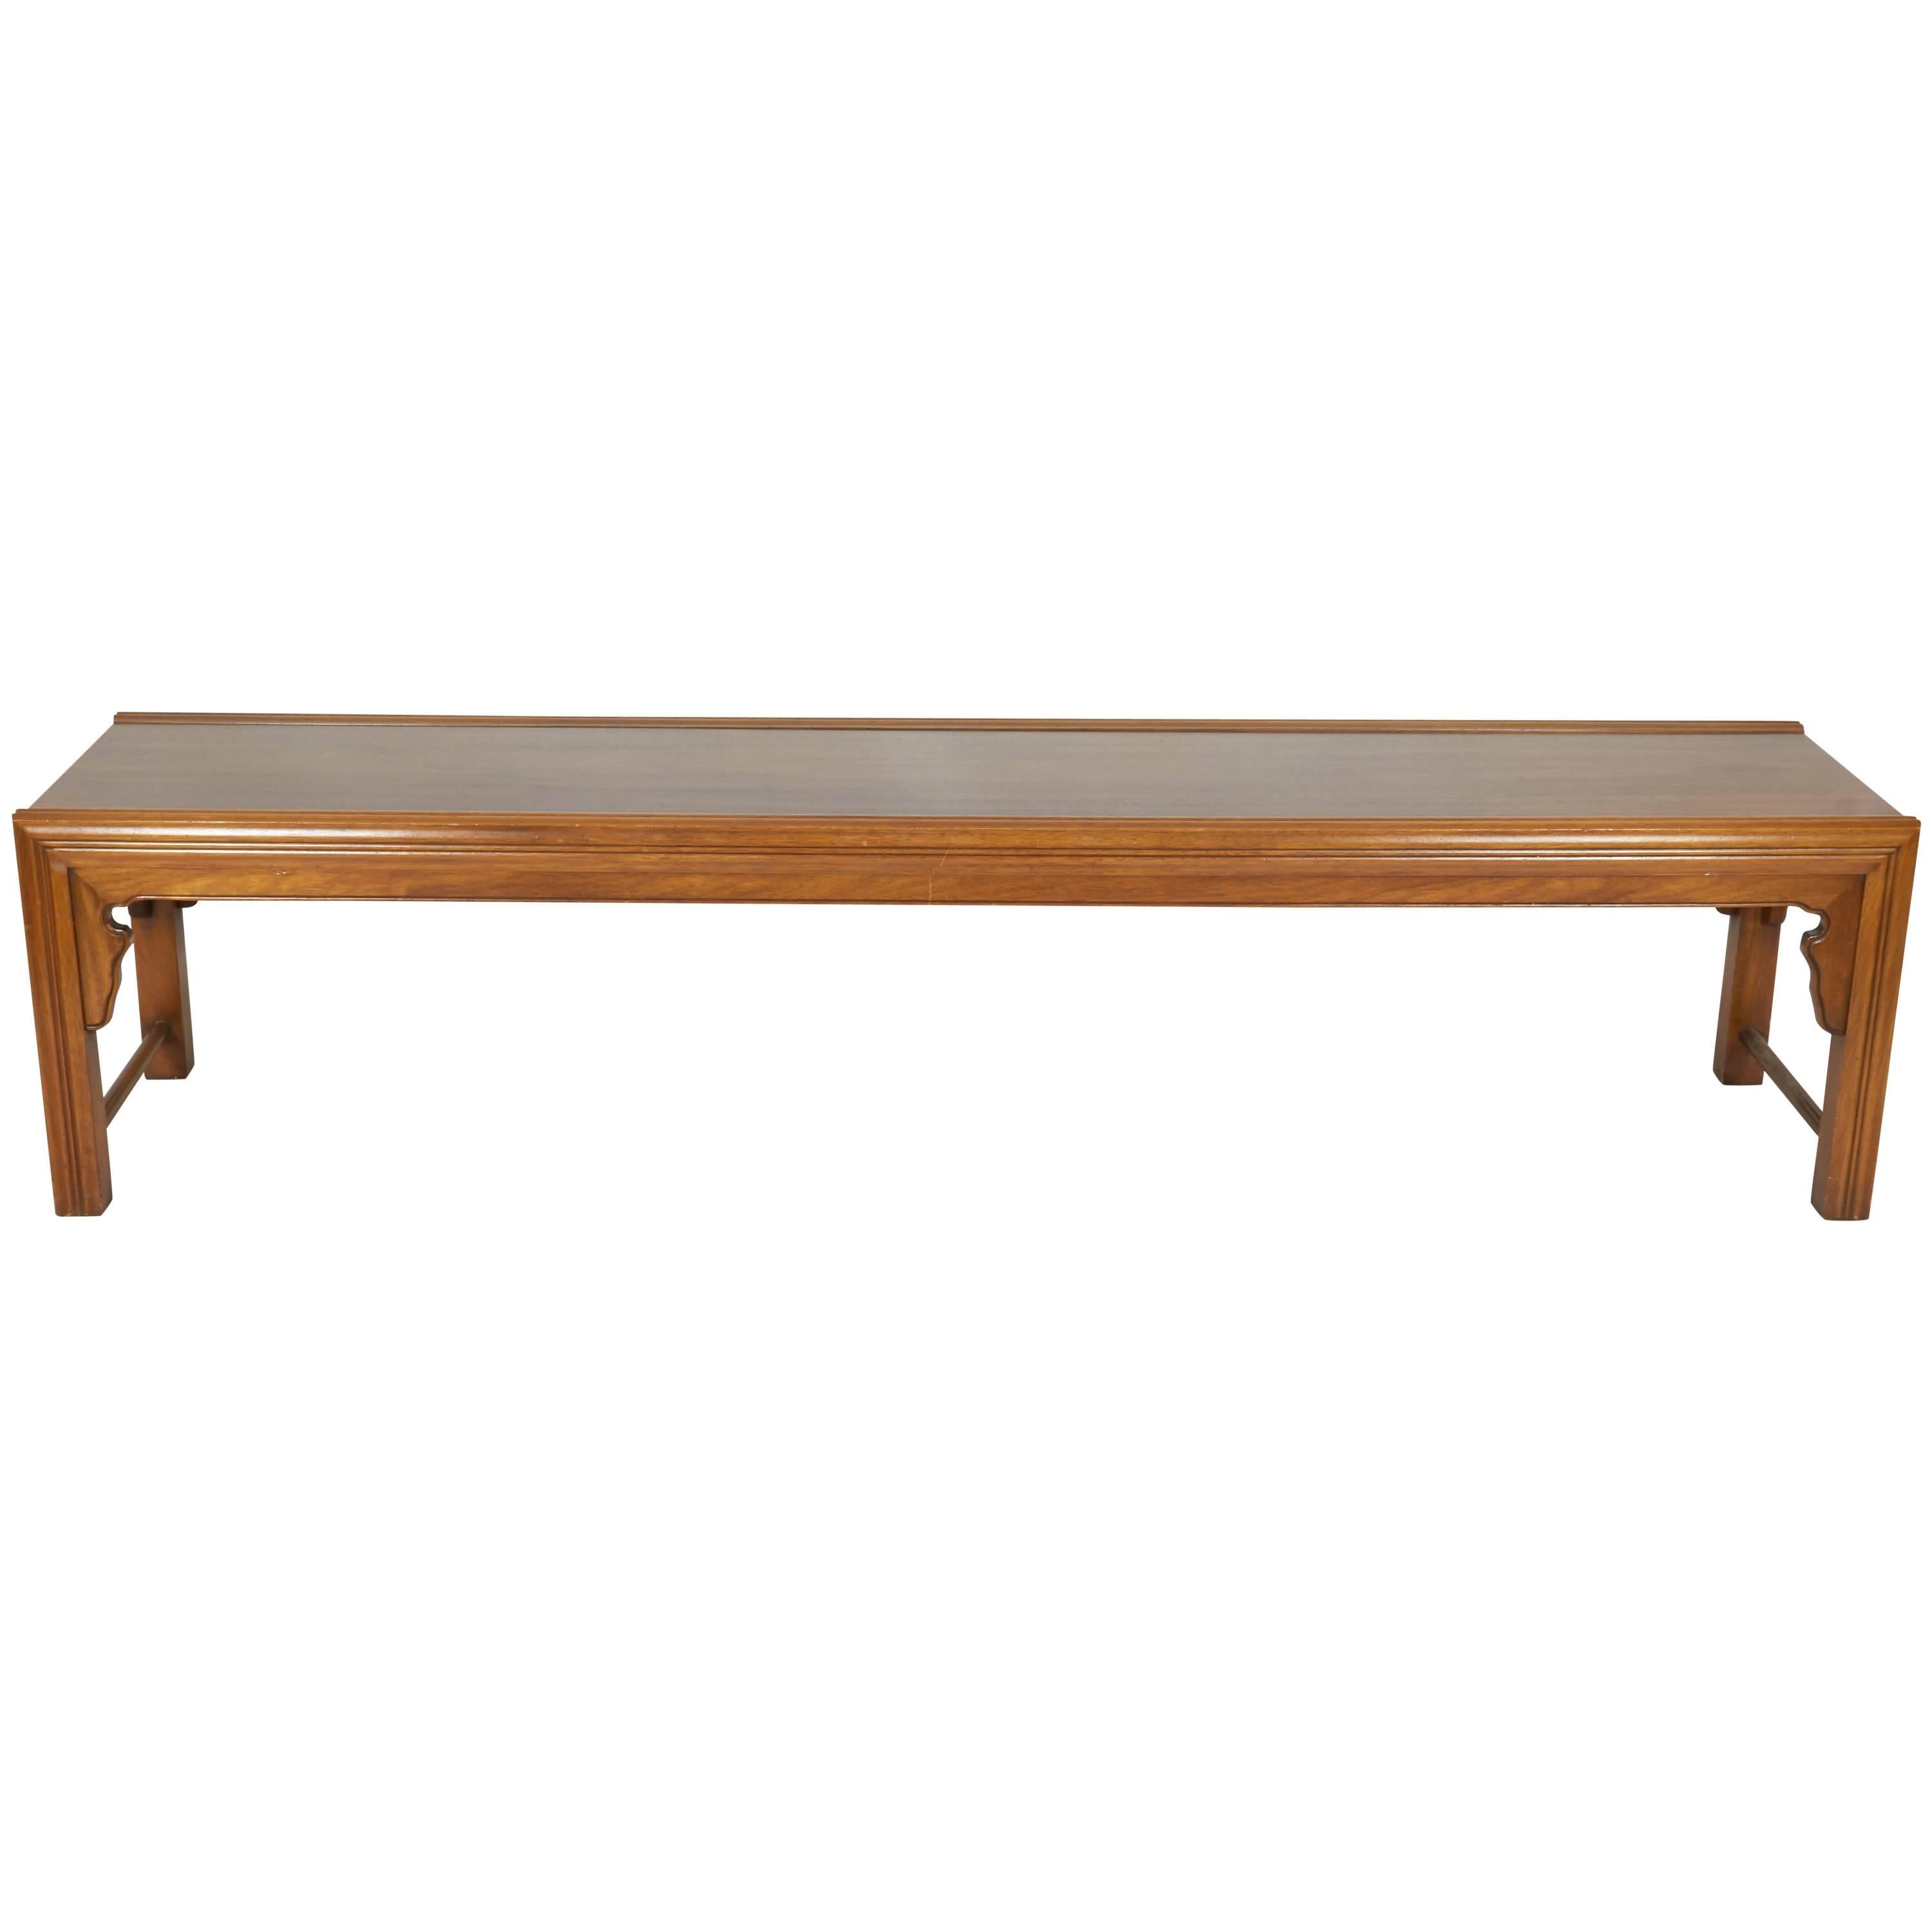 Decorative Modern Coffee Table or Bench by Bert England for Widdicomb For Sale